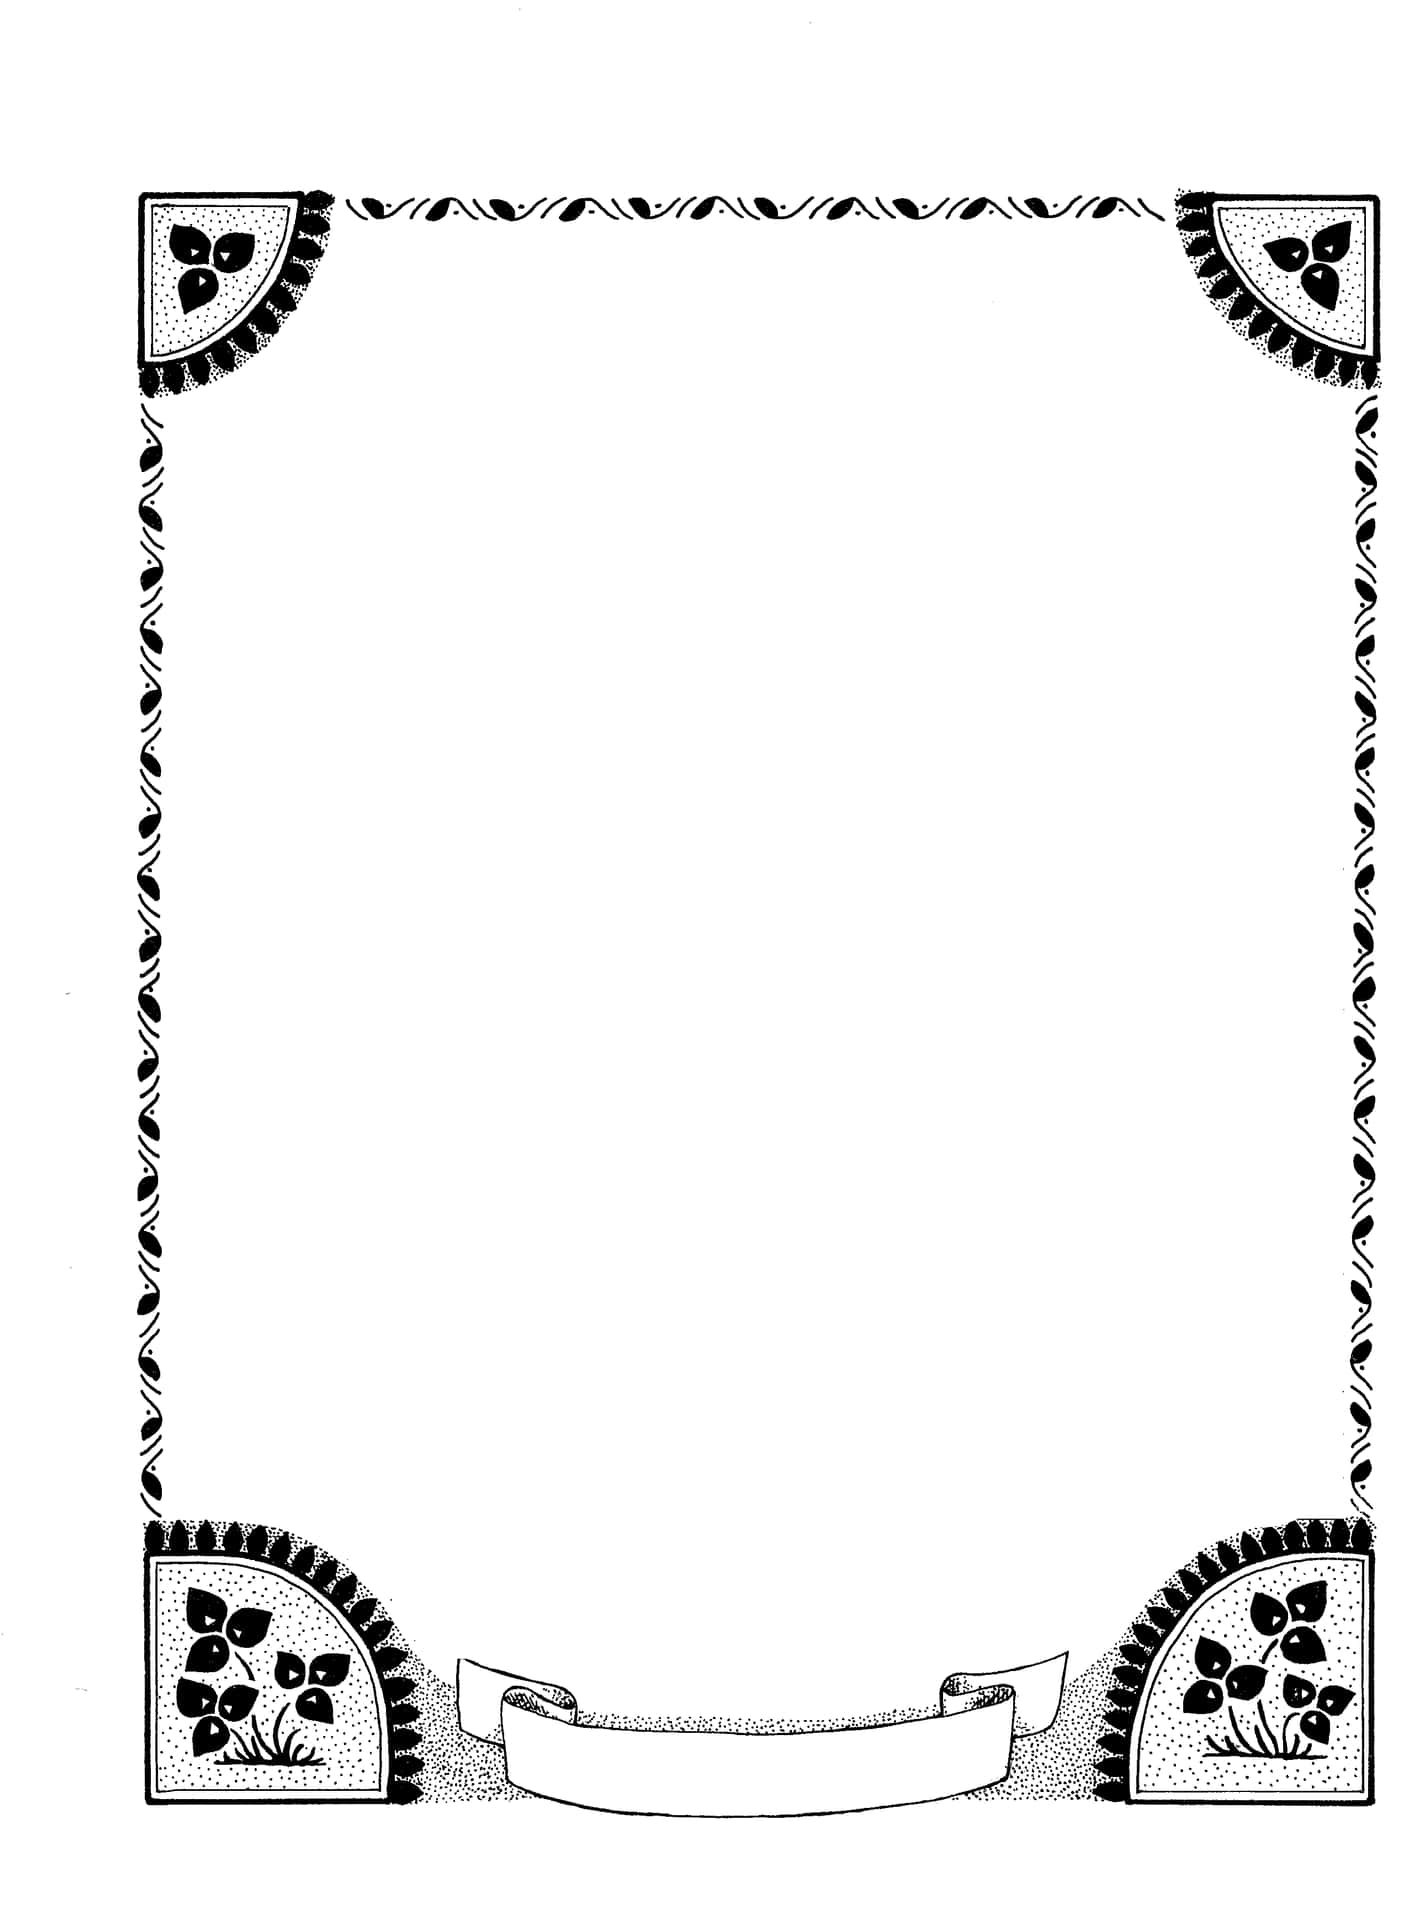 A Black And White Drawing Of A Frame With A Floral Design